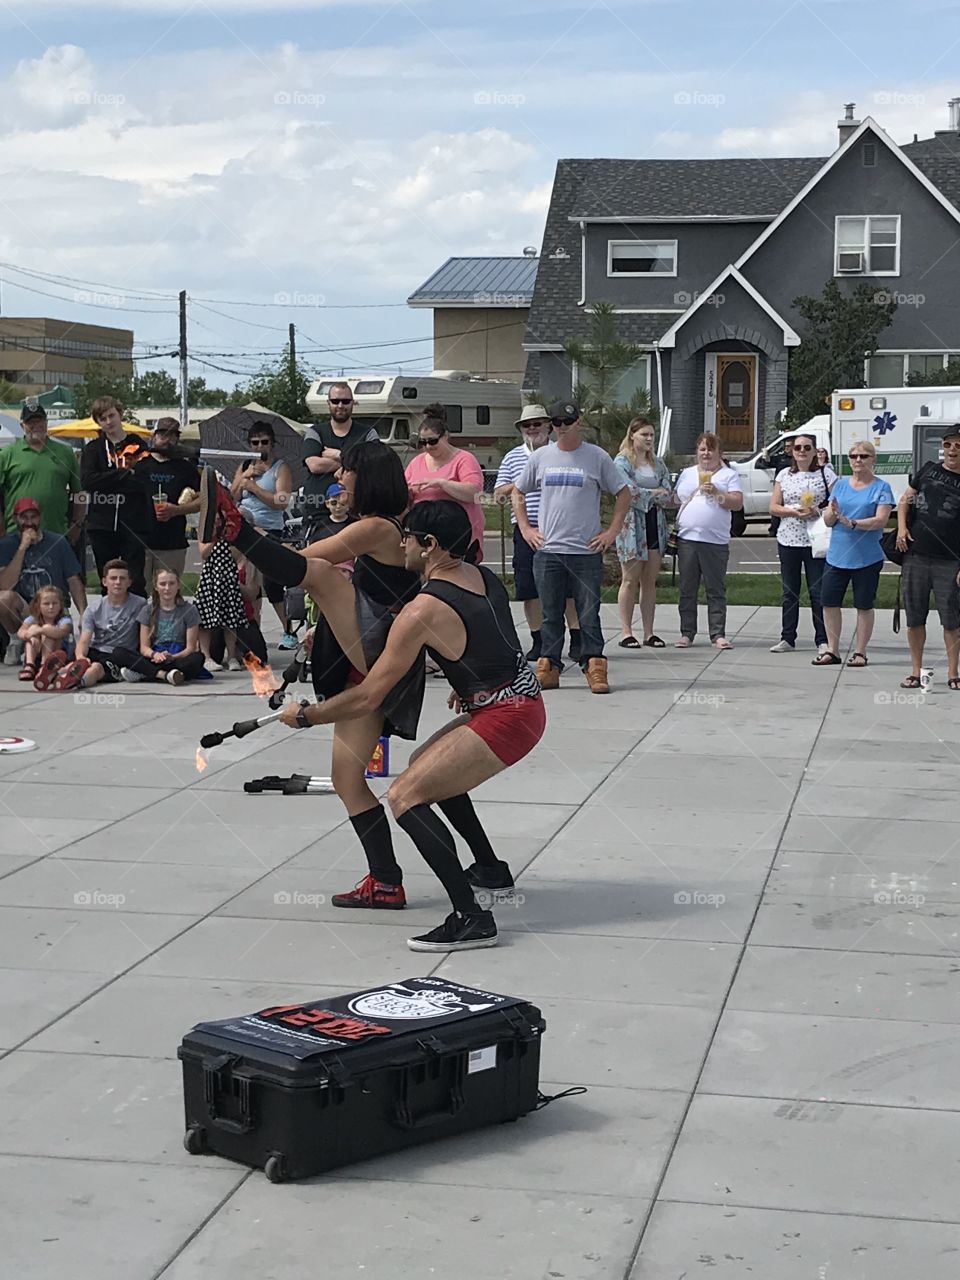 Fire juggling at Centre Fest in Red Deer.